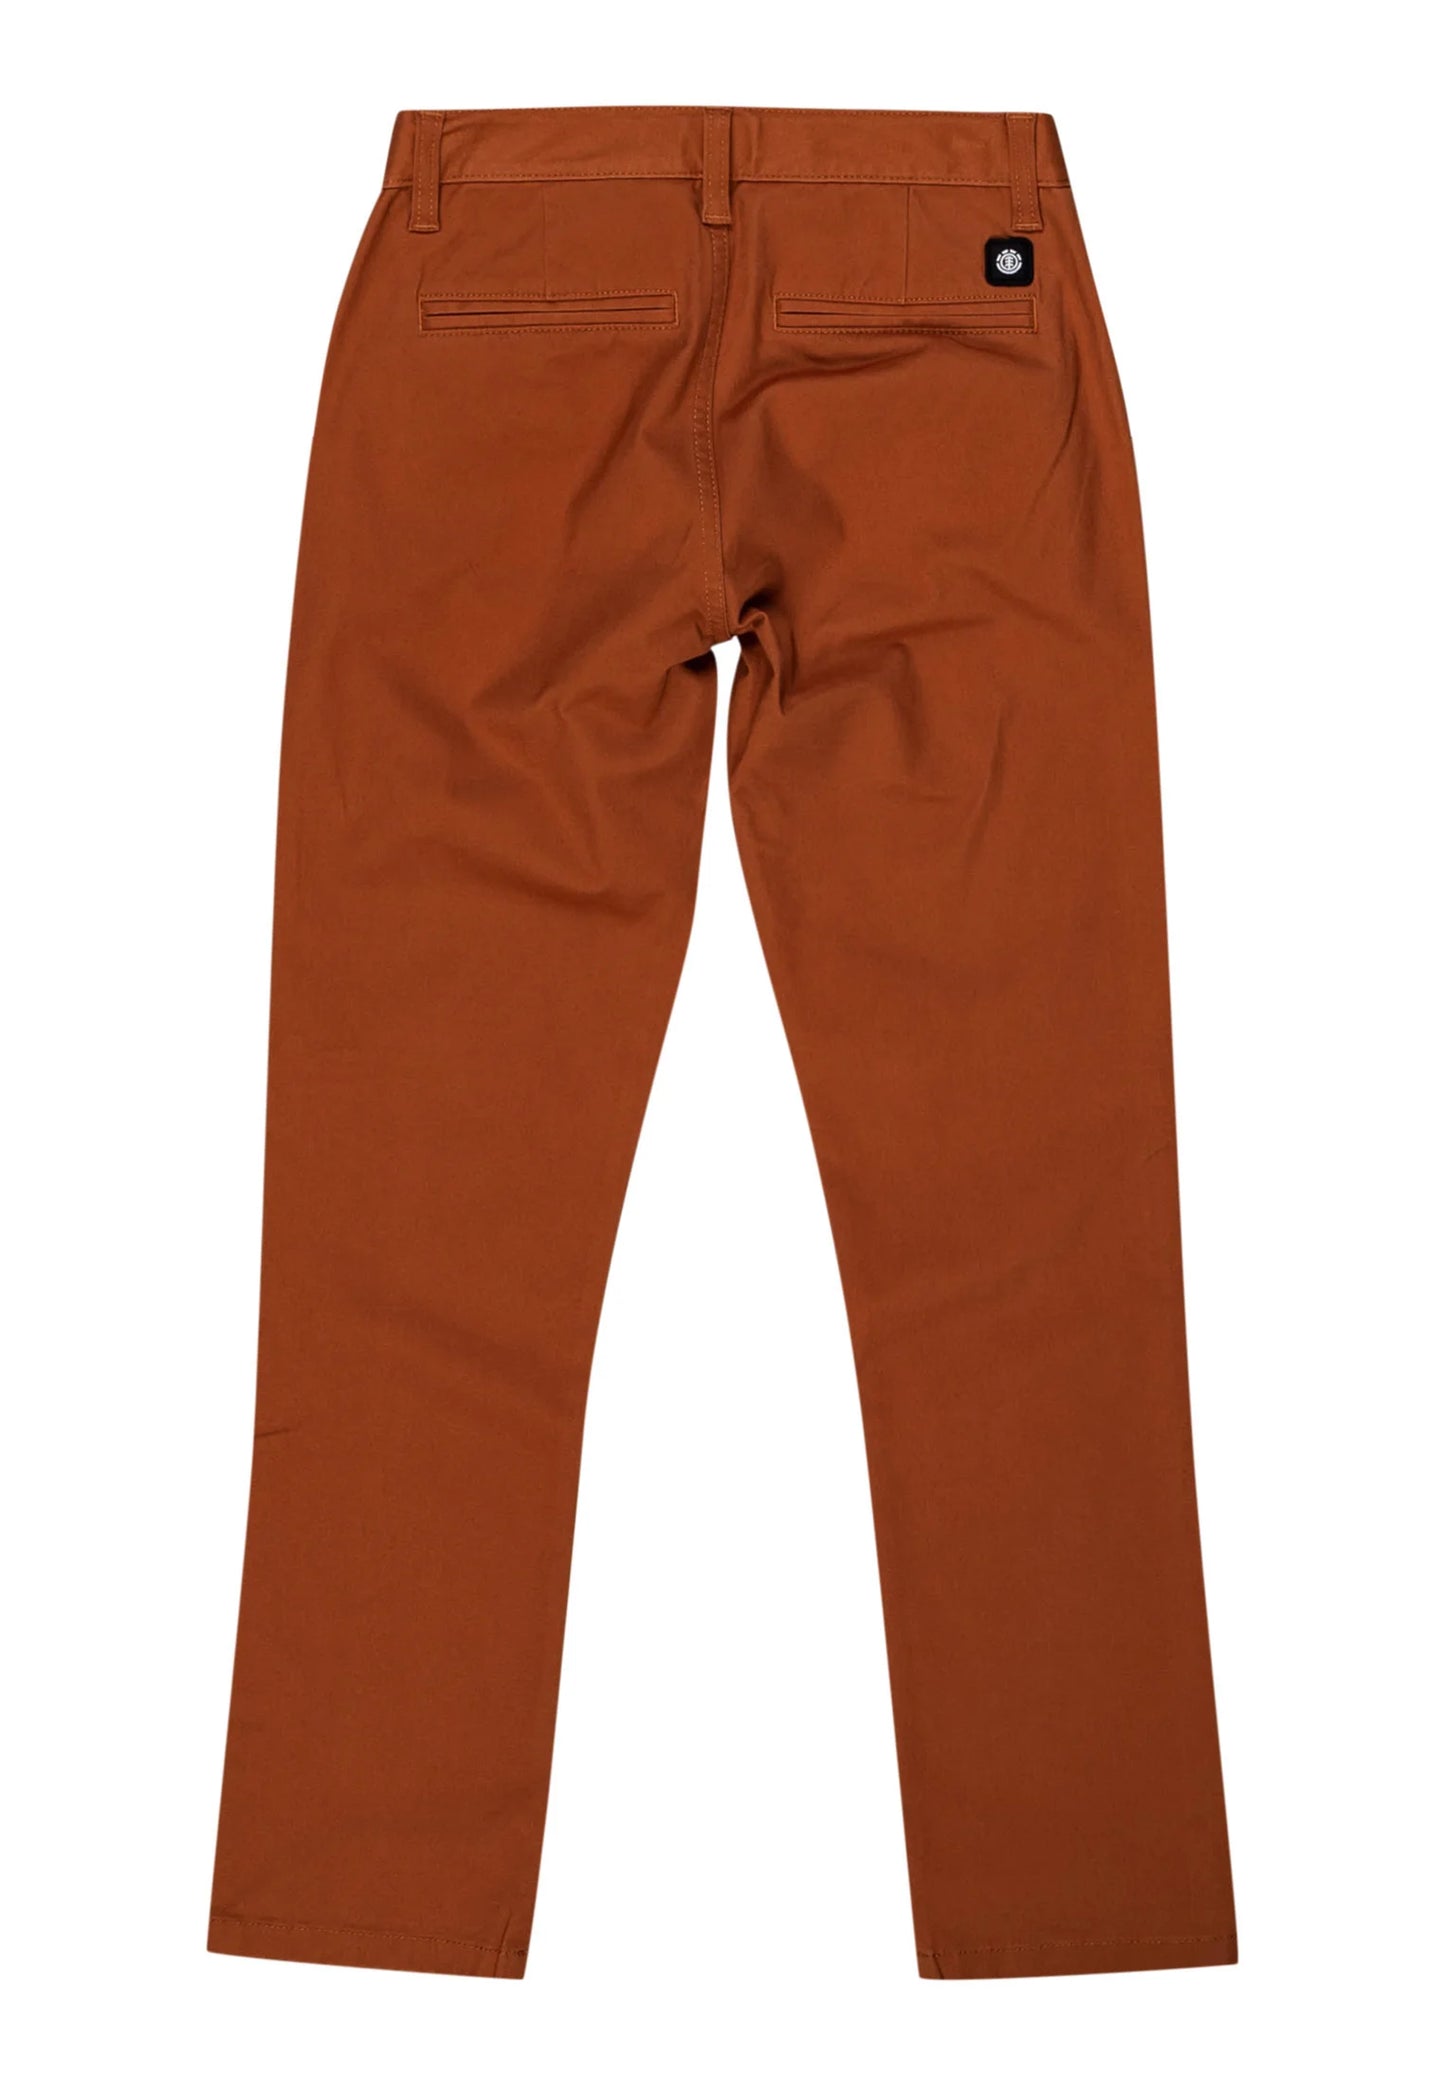 ELEMENT - HOWLAND CLASSIC CHINO YOUTH - MOCHA BISQUE